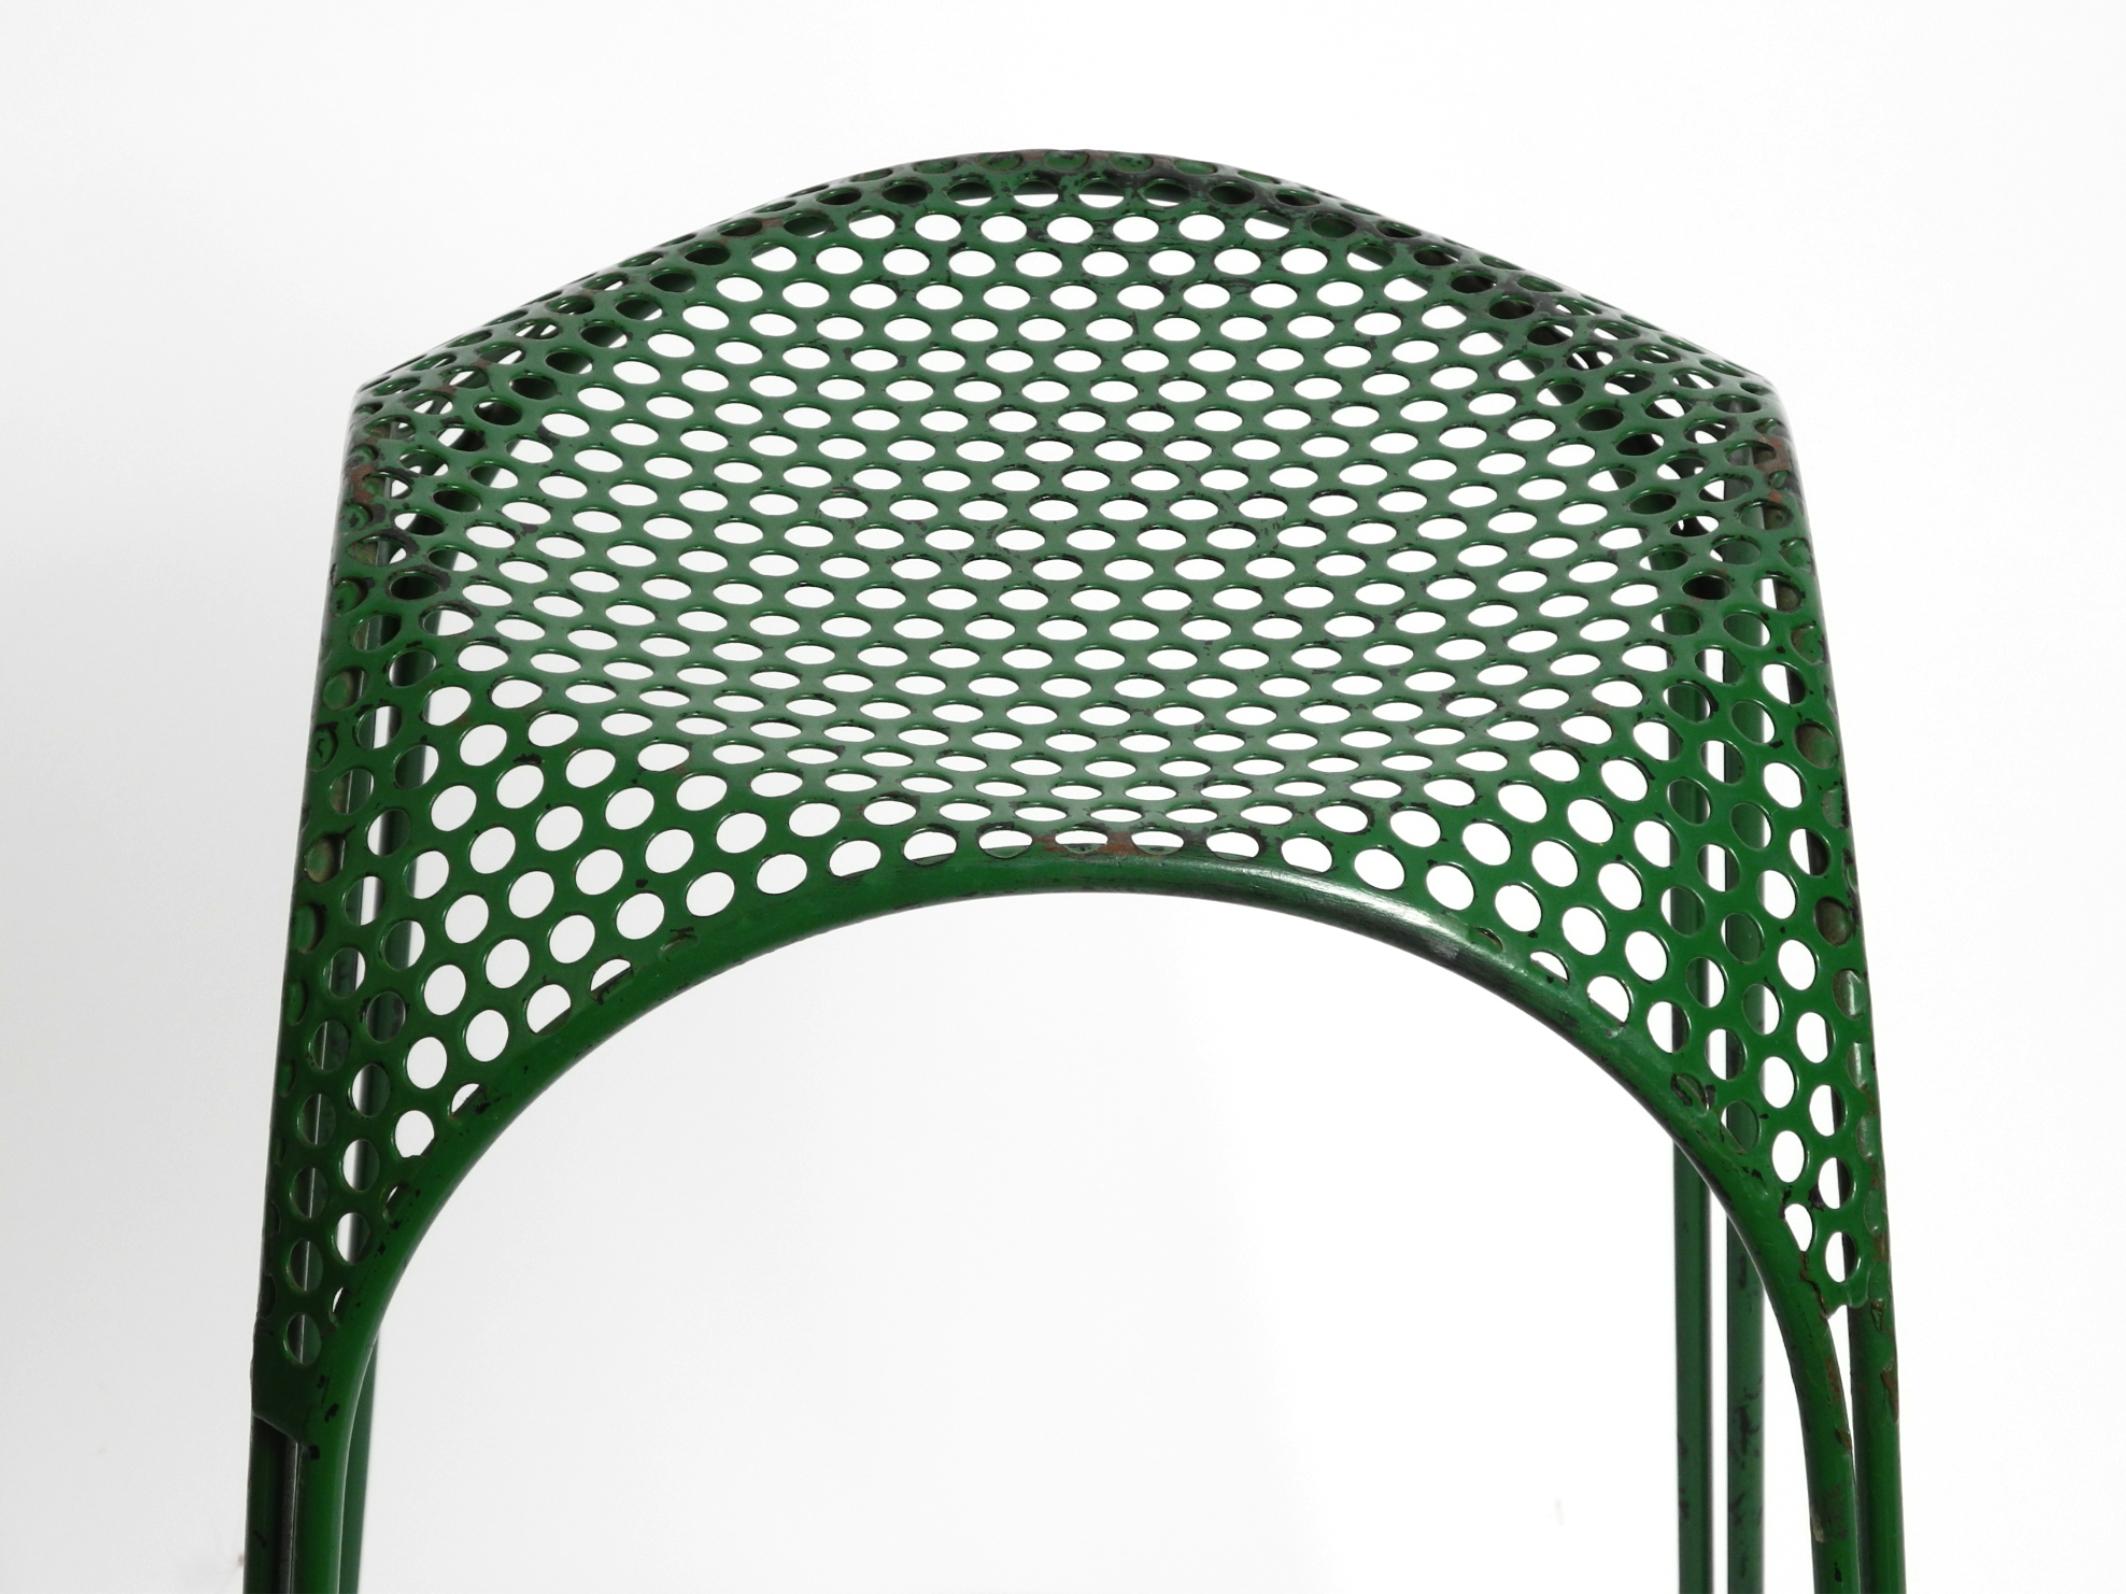 Italian 1960s bar stool made of green painted metal with perforated metal seat For Sale 12